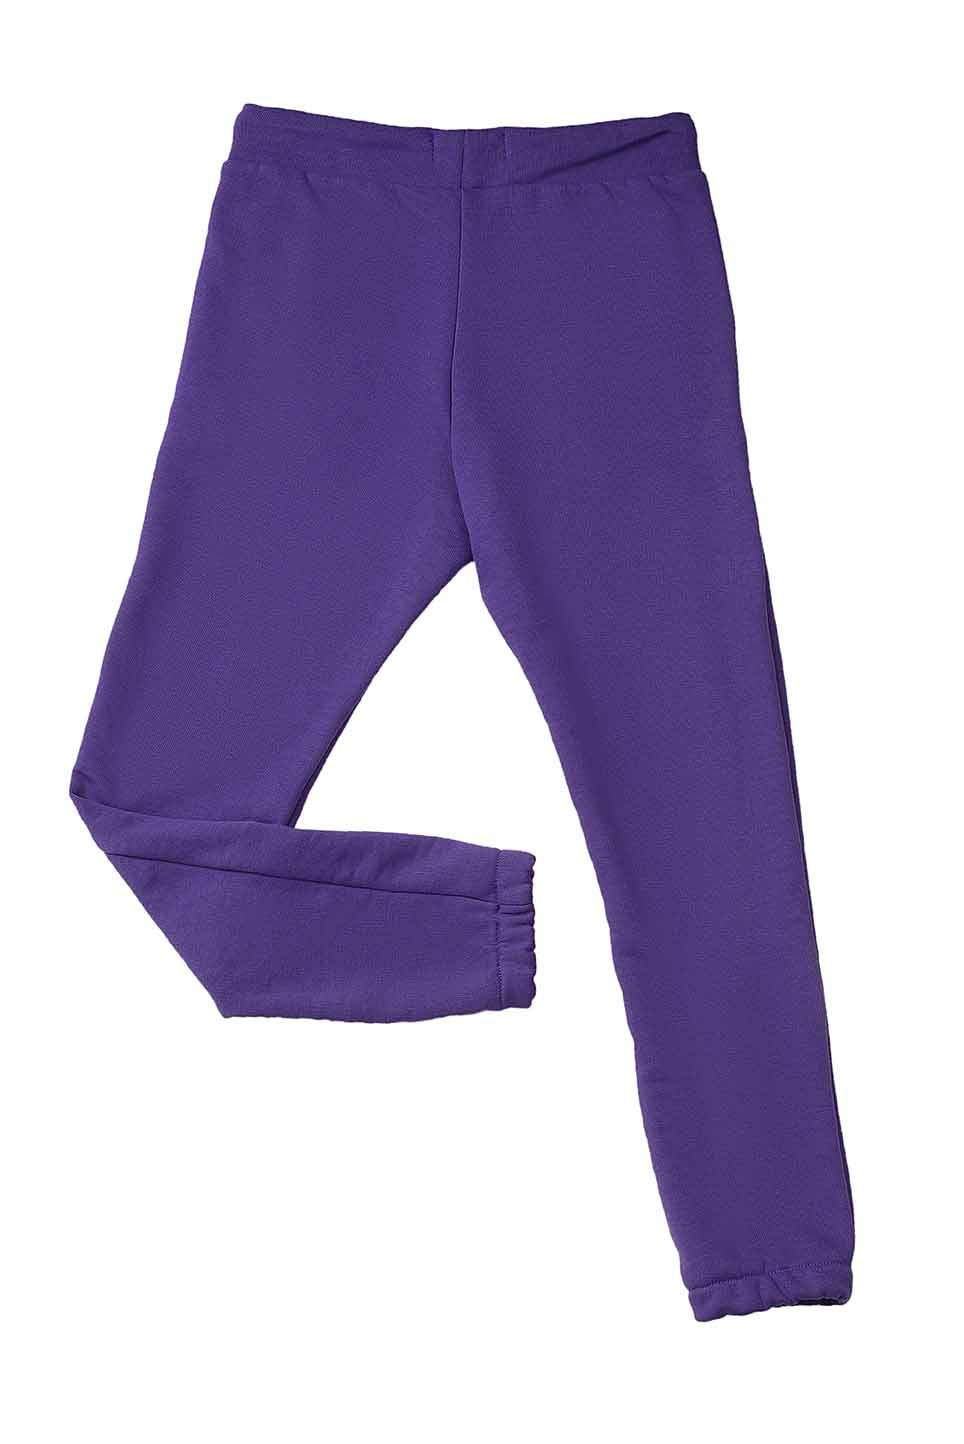 KDS-GC-12633 PULL ON TROUSER PURPLE